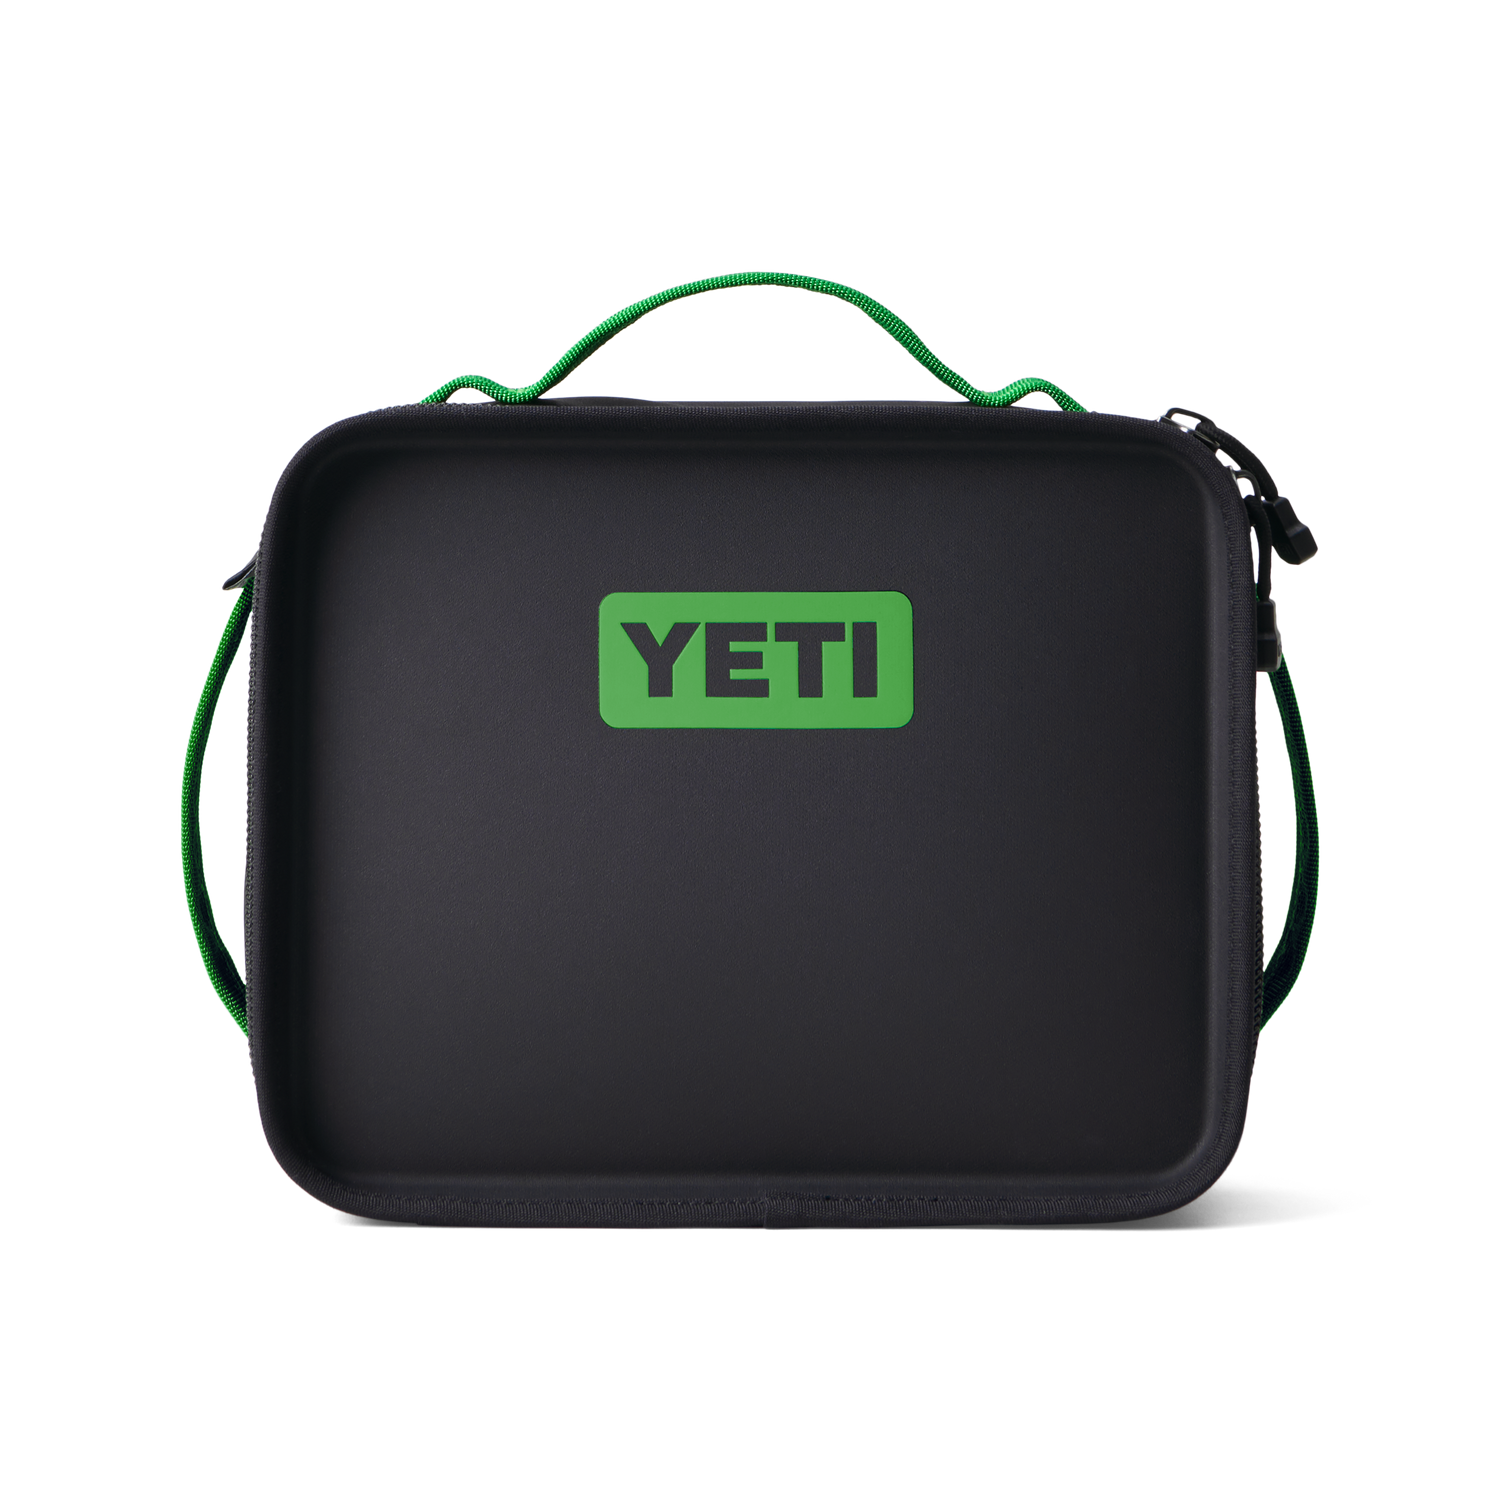 Yeti Daytrip Lunch Box - The Ultimate Lunch Box - Complete Product Review 